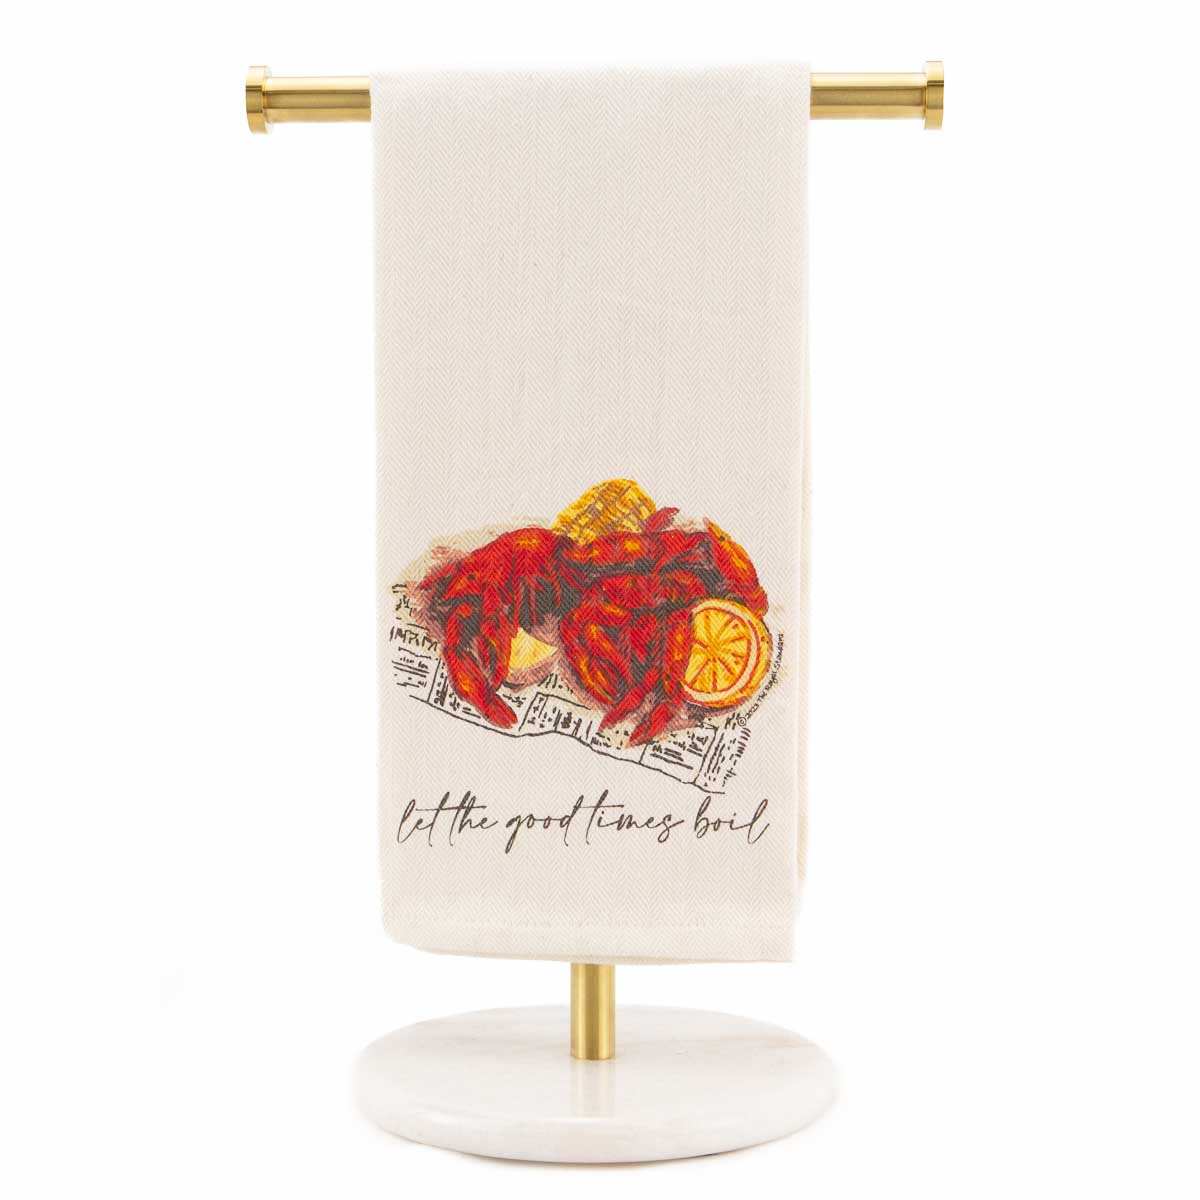 Good Time Boil Hand Towel